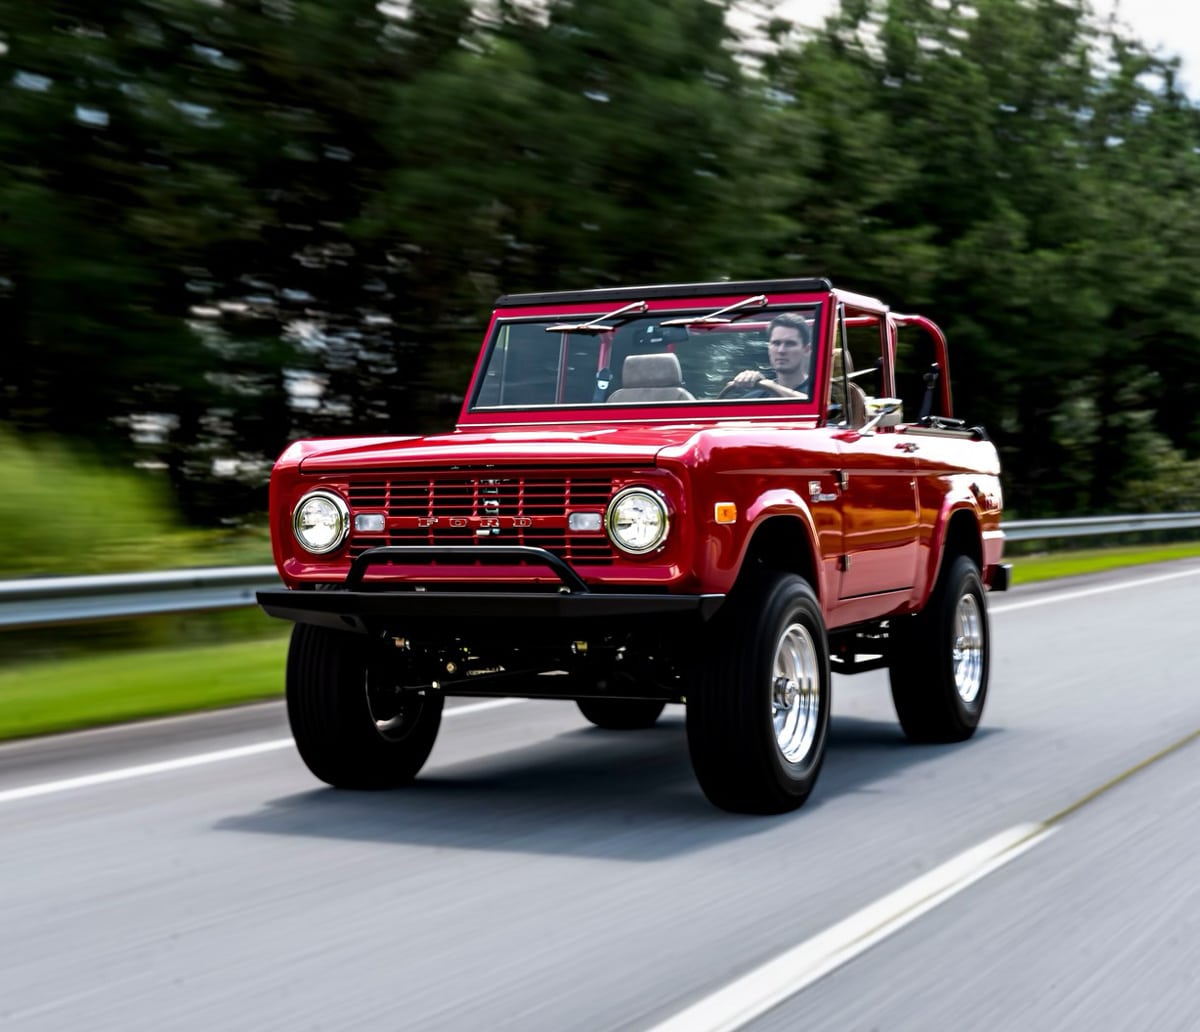 Budgeting for a Restored Classic Bronco